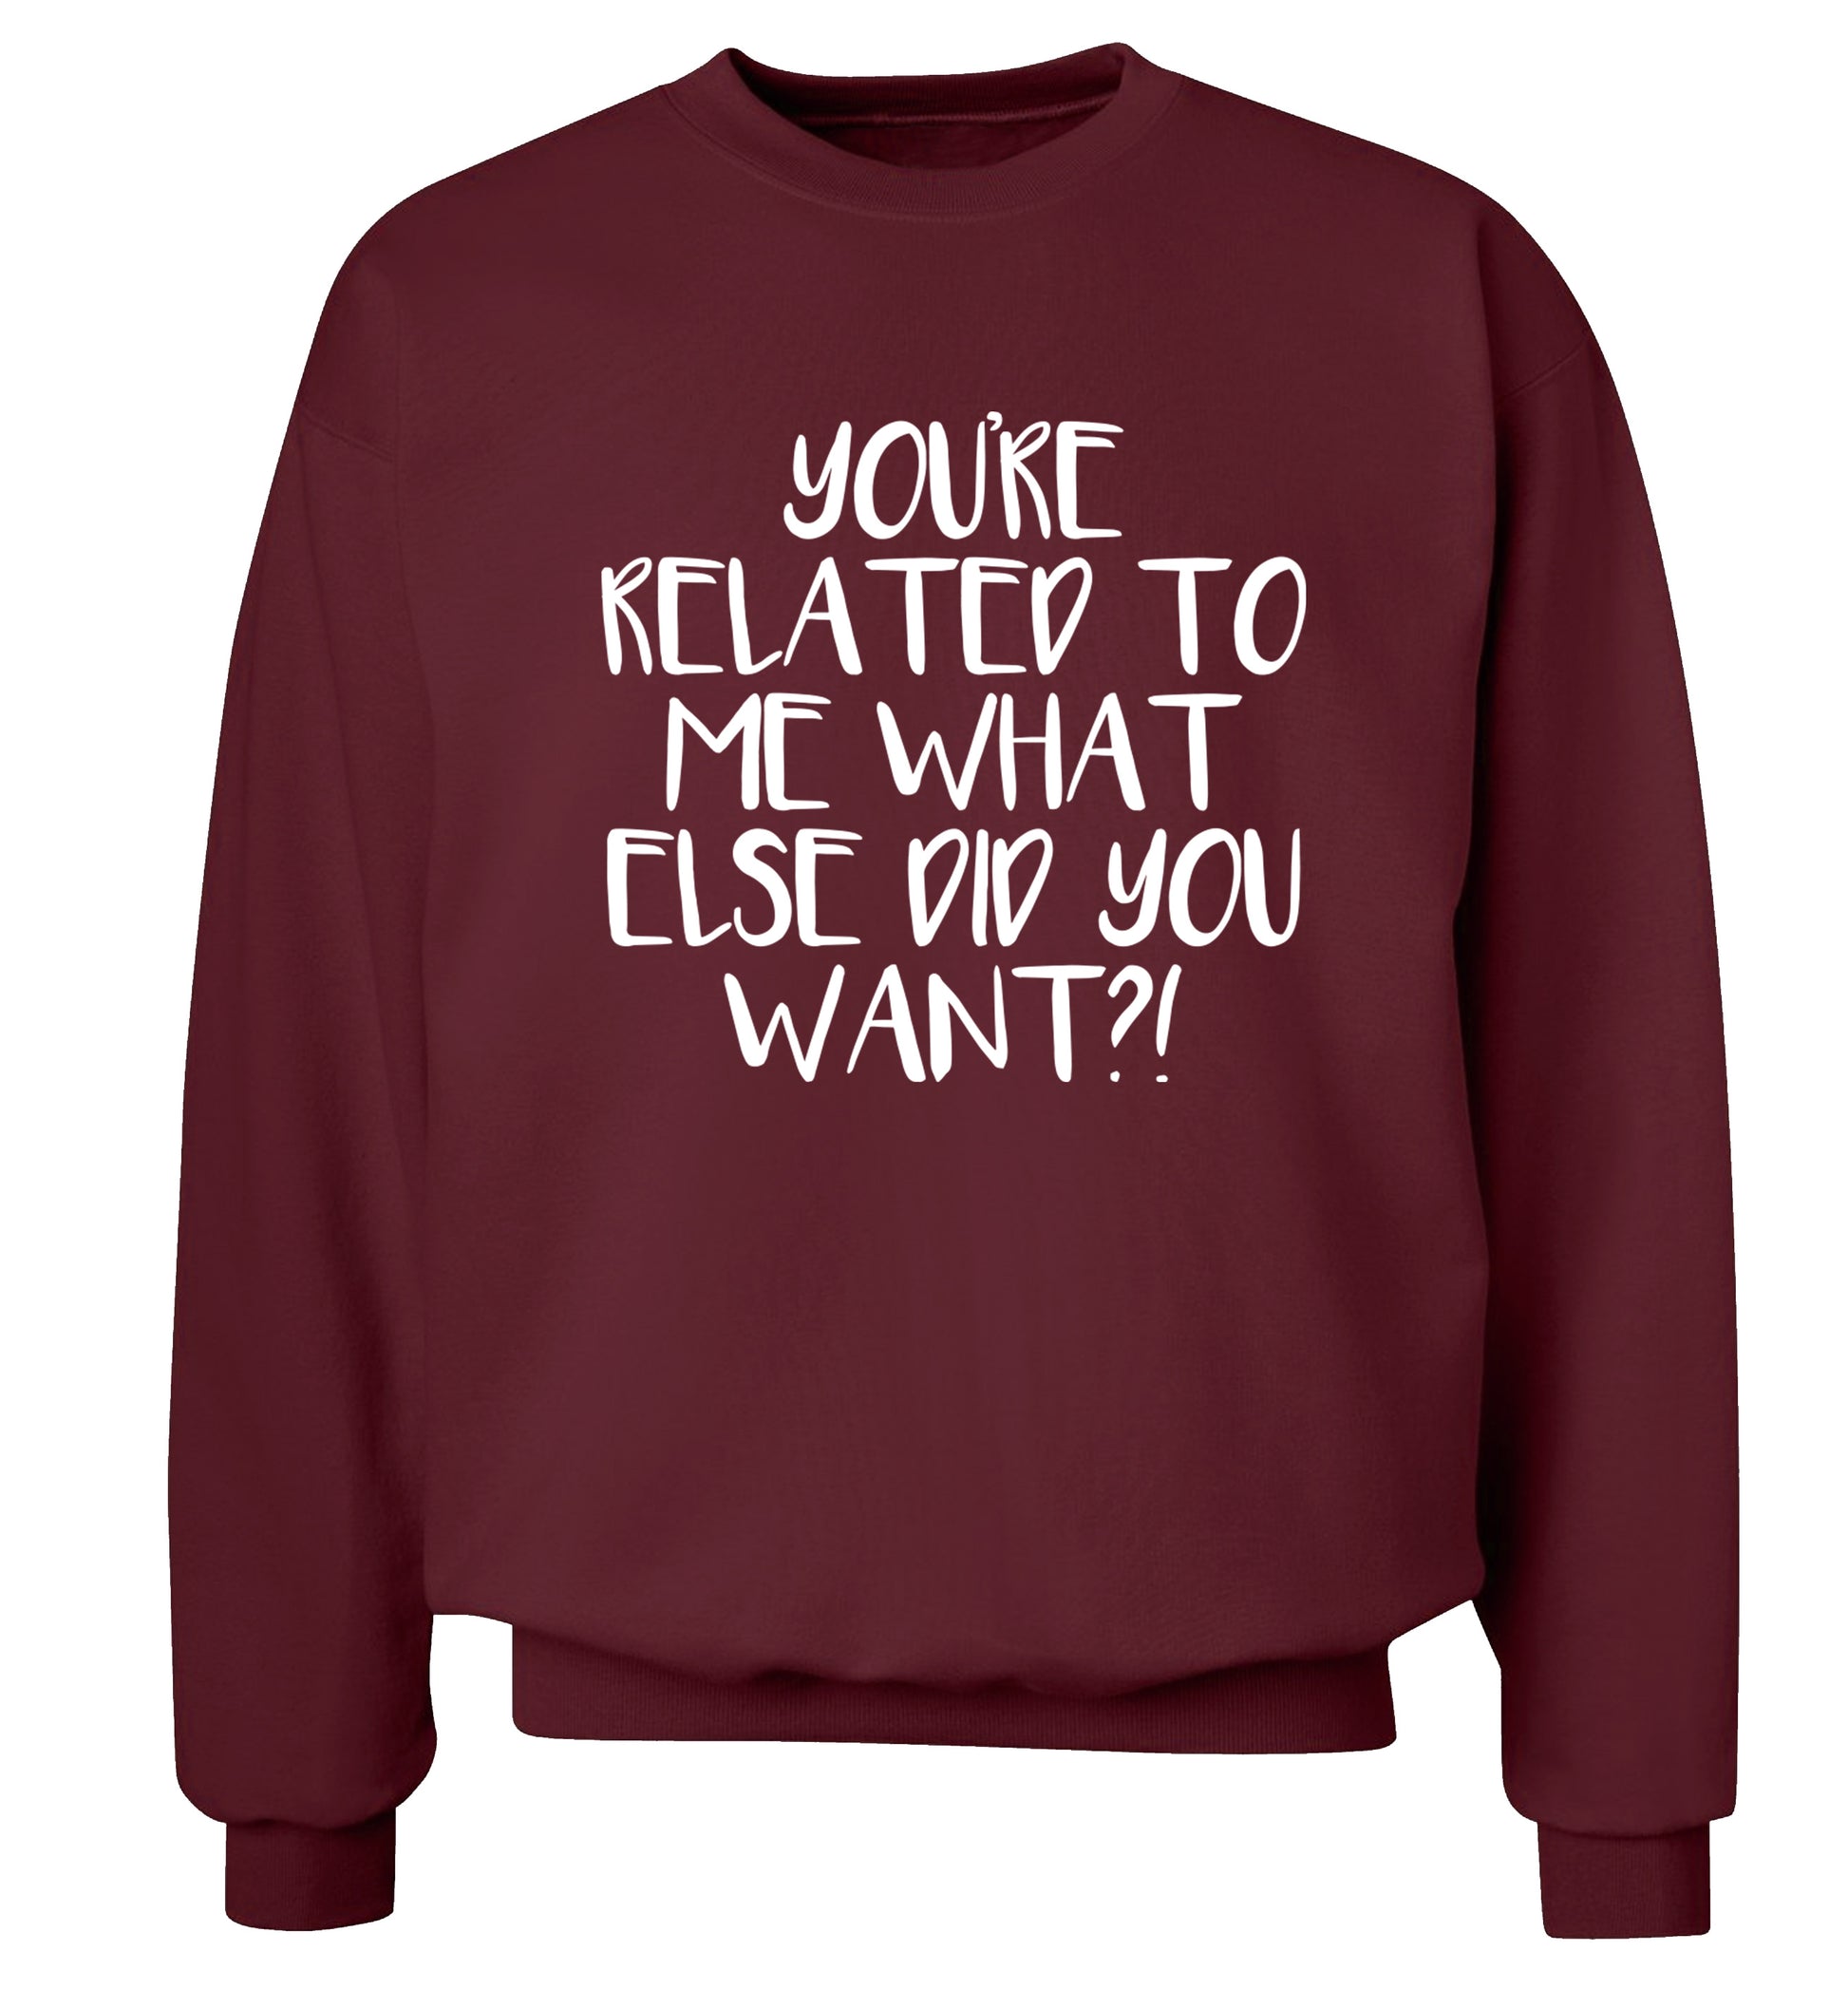 You're related to me what more do you want? Adult's unisex maroon Sweater 2XL